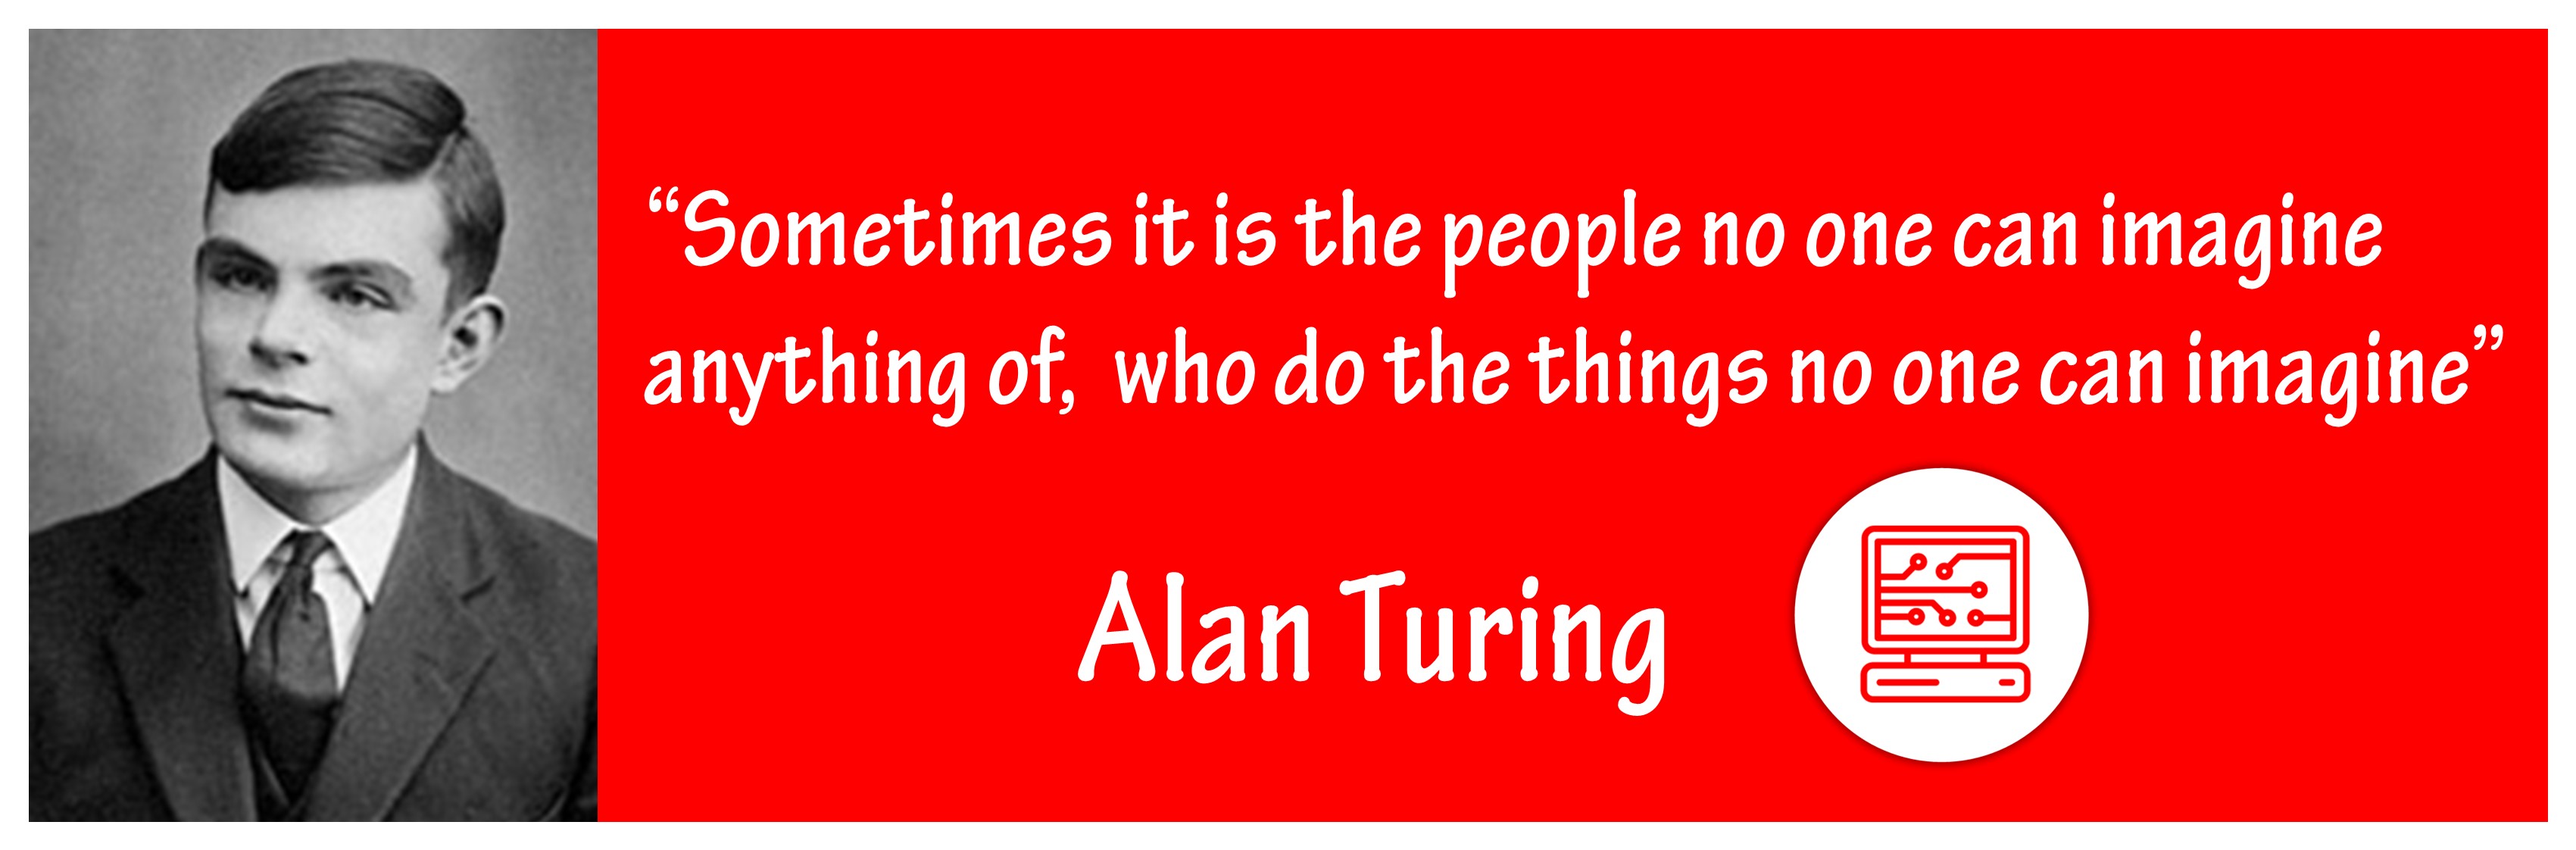 Turing - House Heroes Quote Banners July 2020